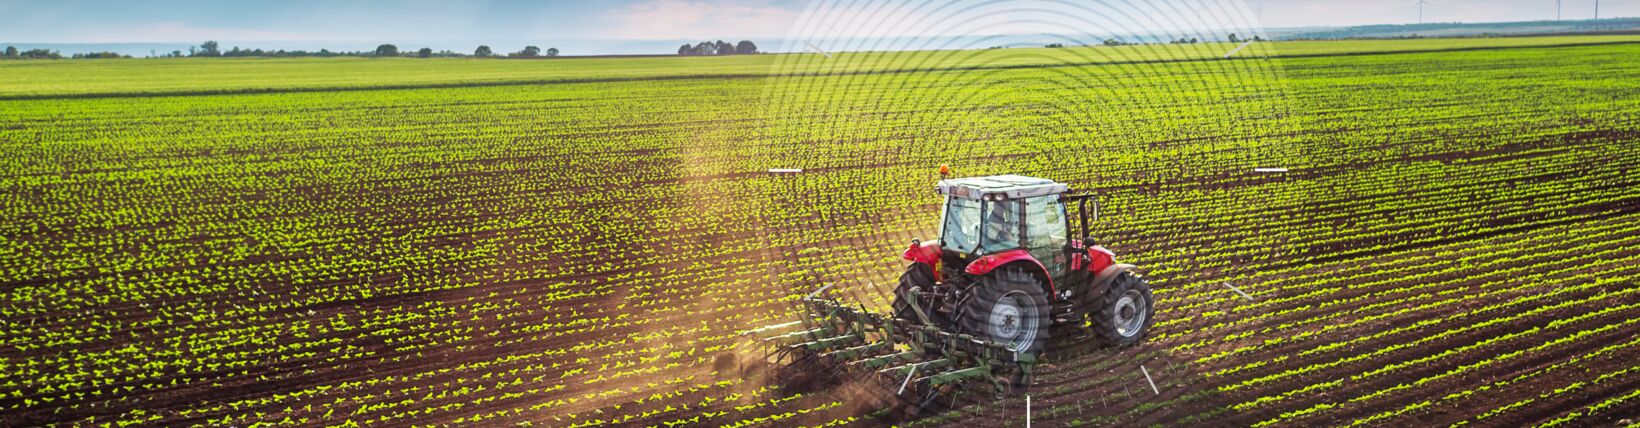 Photograph of tractor in a field with concentric signal rings emanating from it